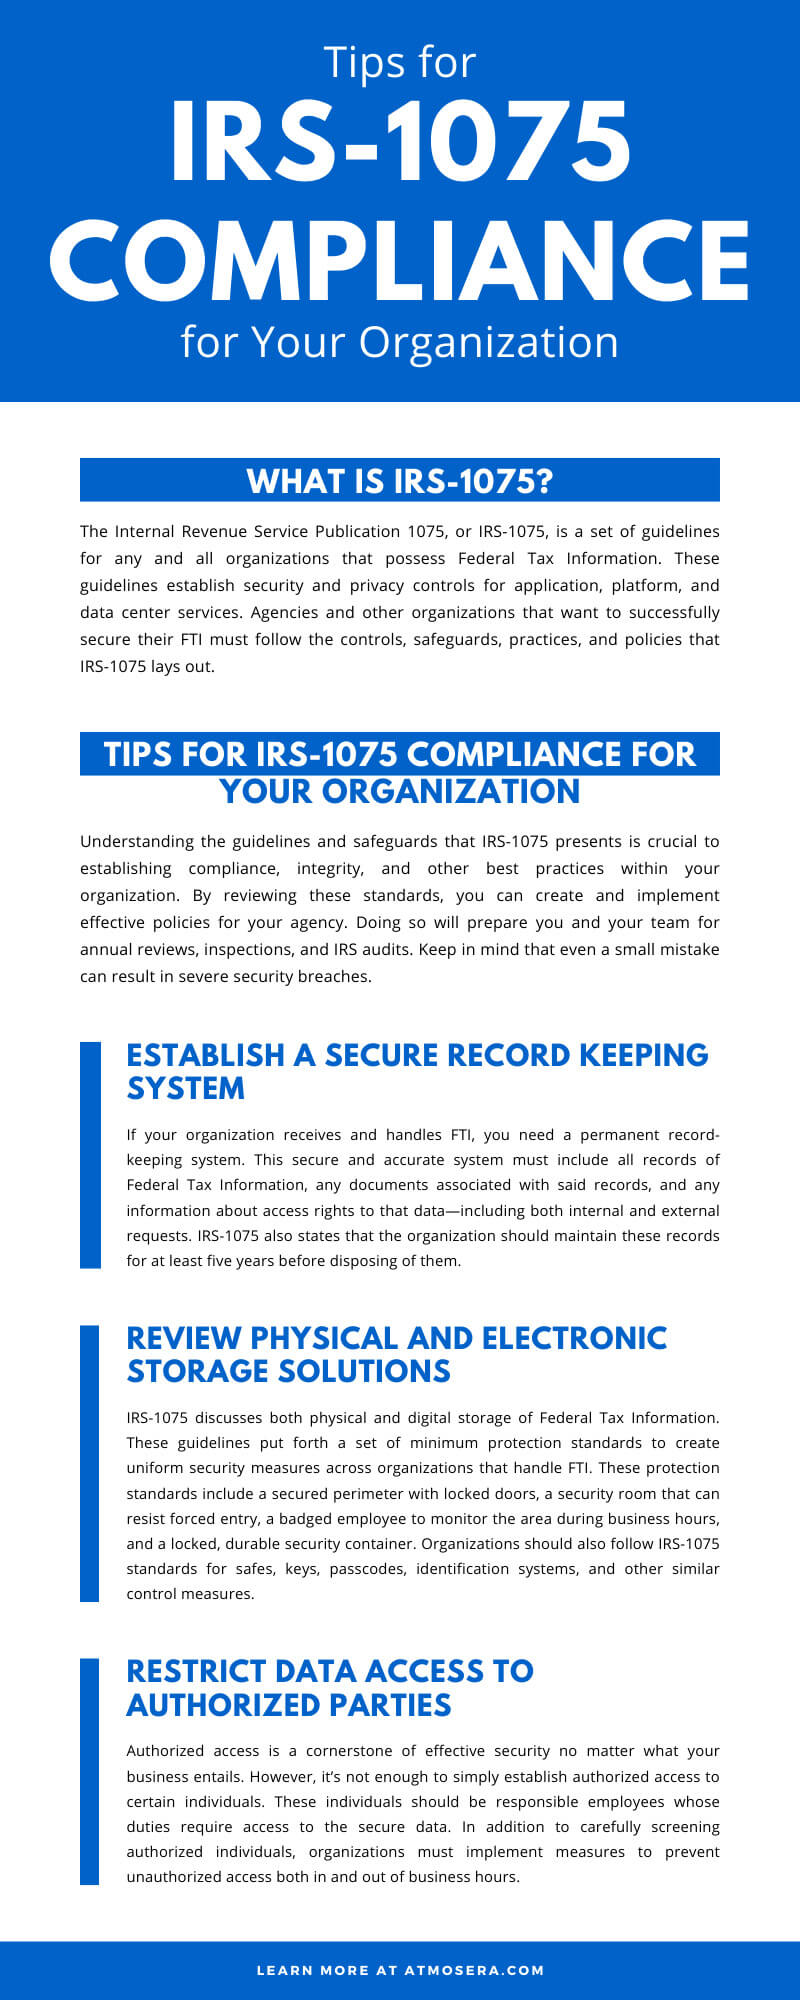 Tips for IRS-1075 Compliance for Your Organization